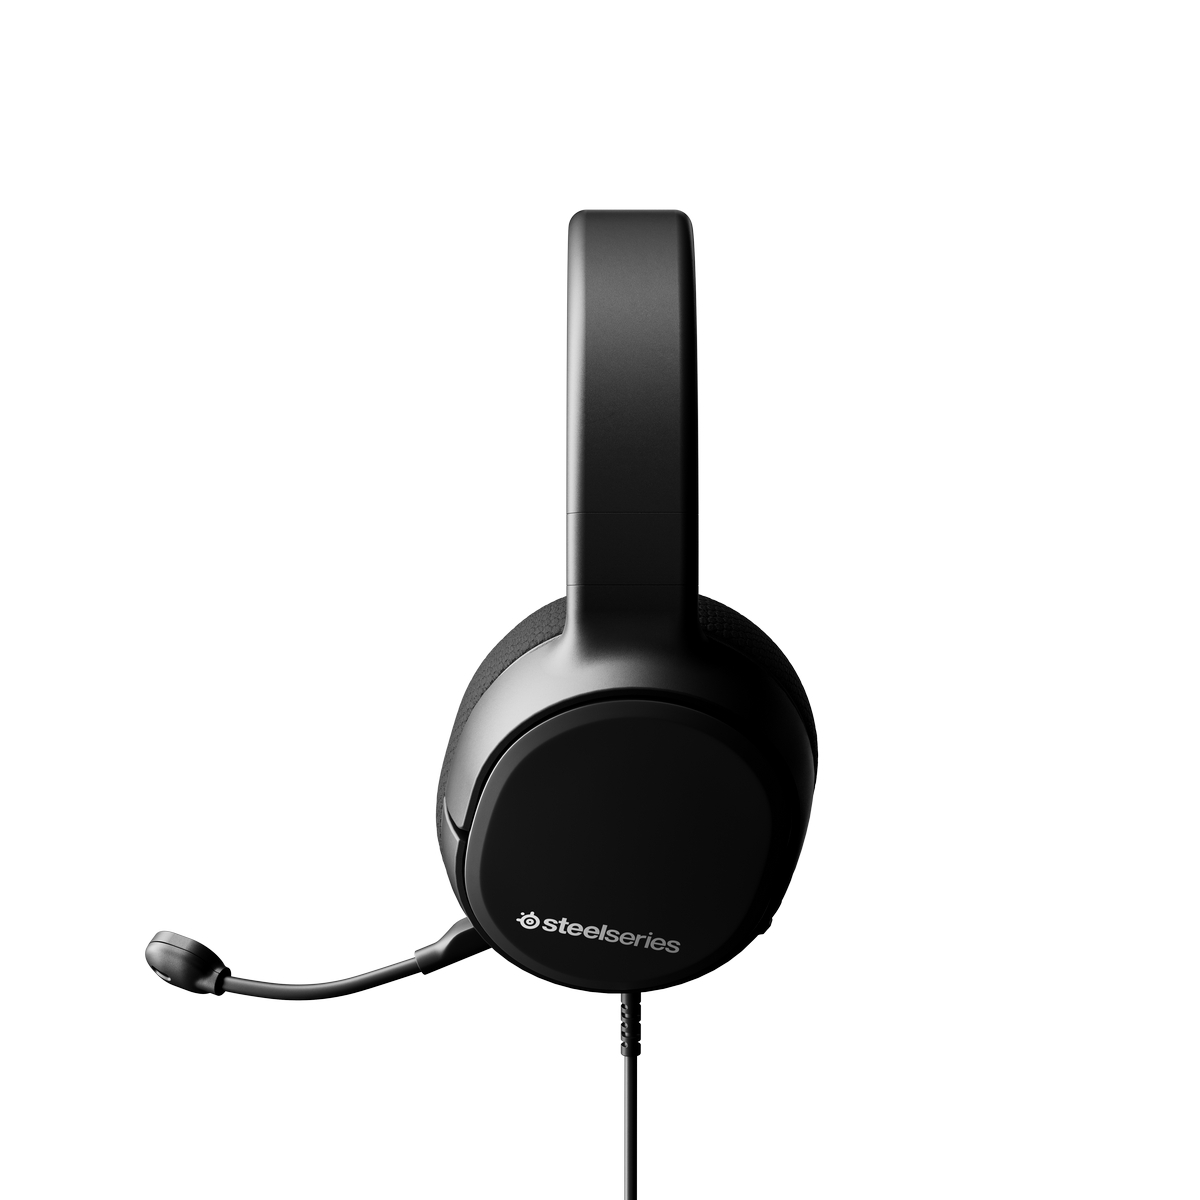 SteelSeries - SteelSeries Arctis 1 Gaming Headset (PC/PS4/XBOX/SWITCH)